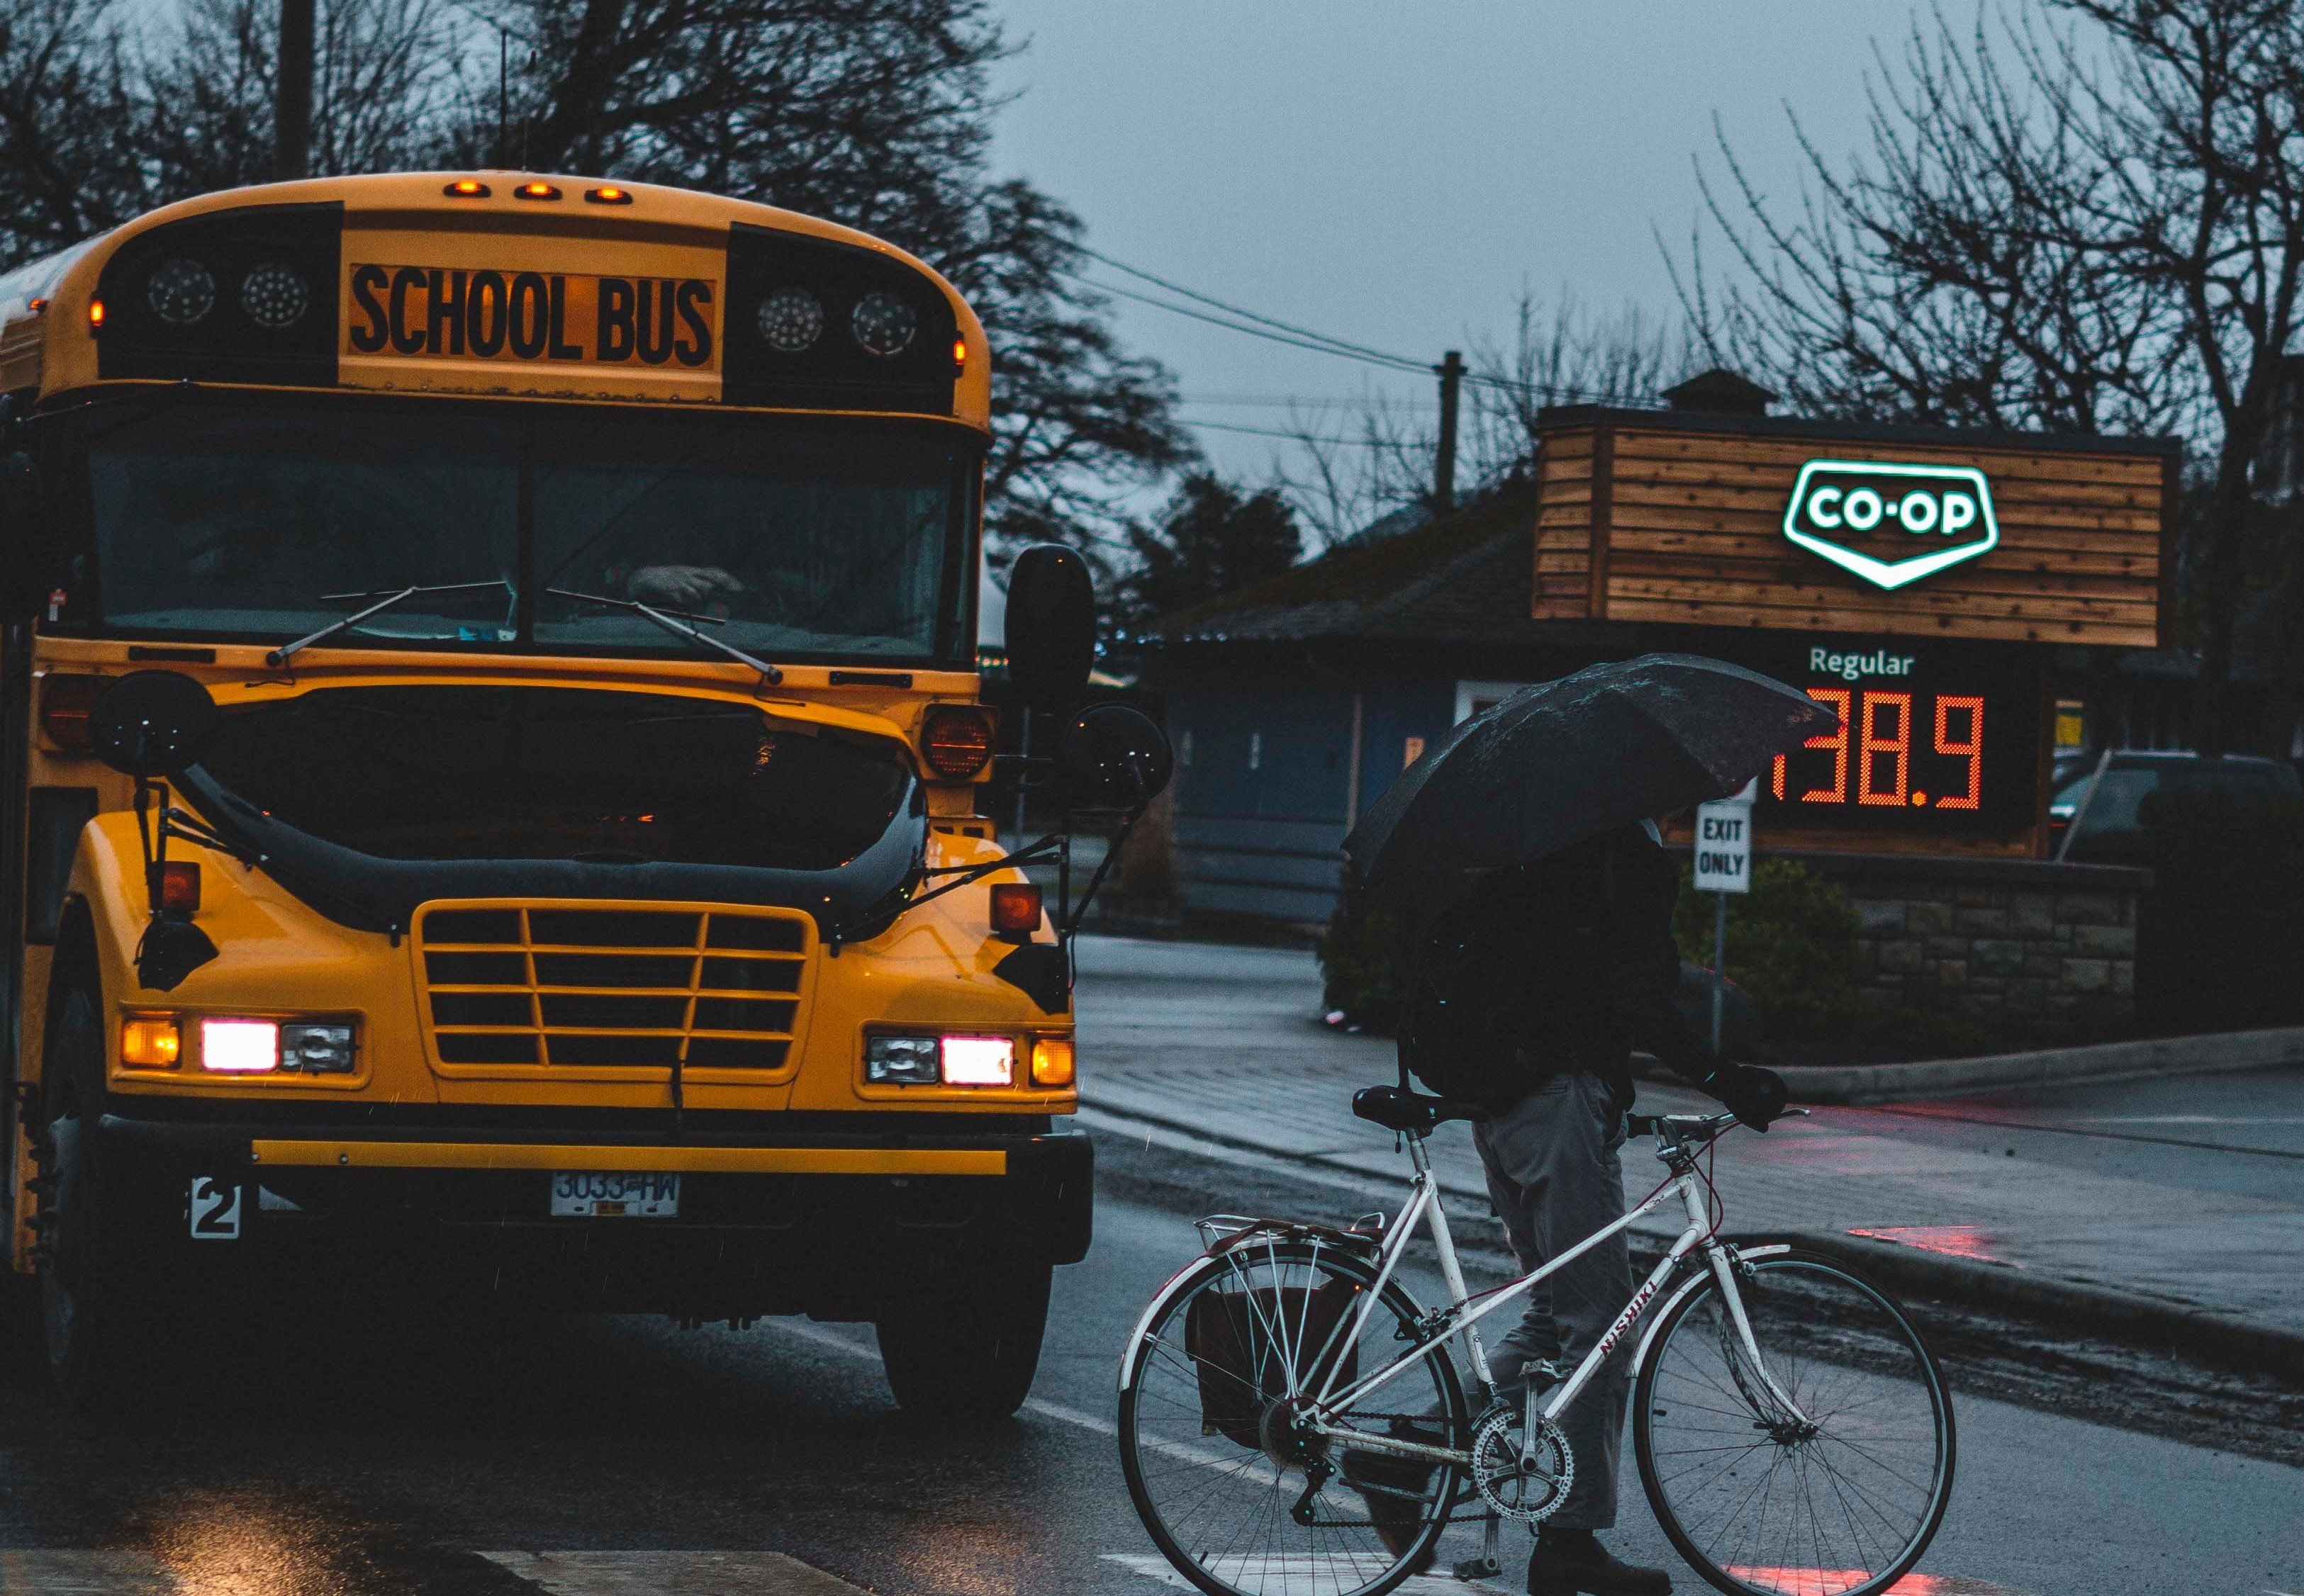 The bus driver dropped off the kids 15 minutes earlier on a rainy day | Photo: Unsplash 